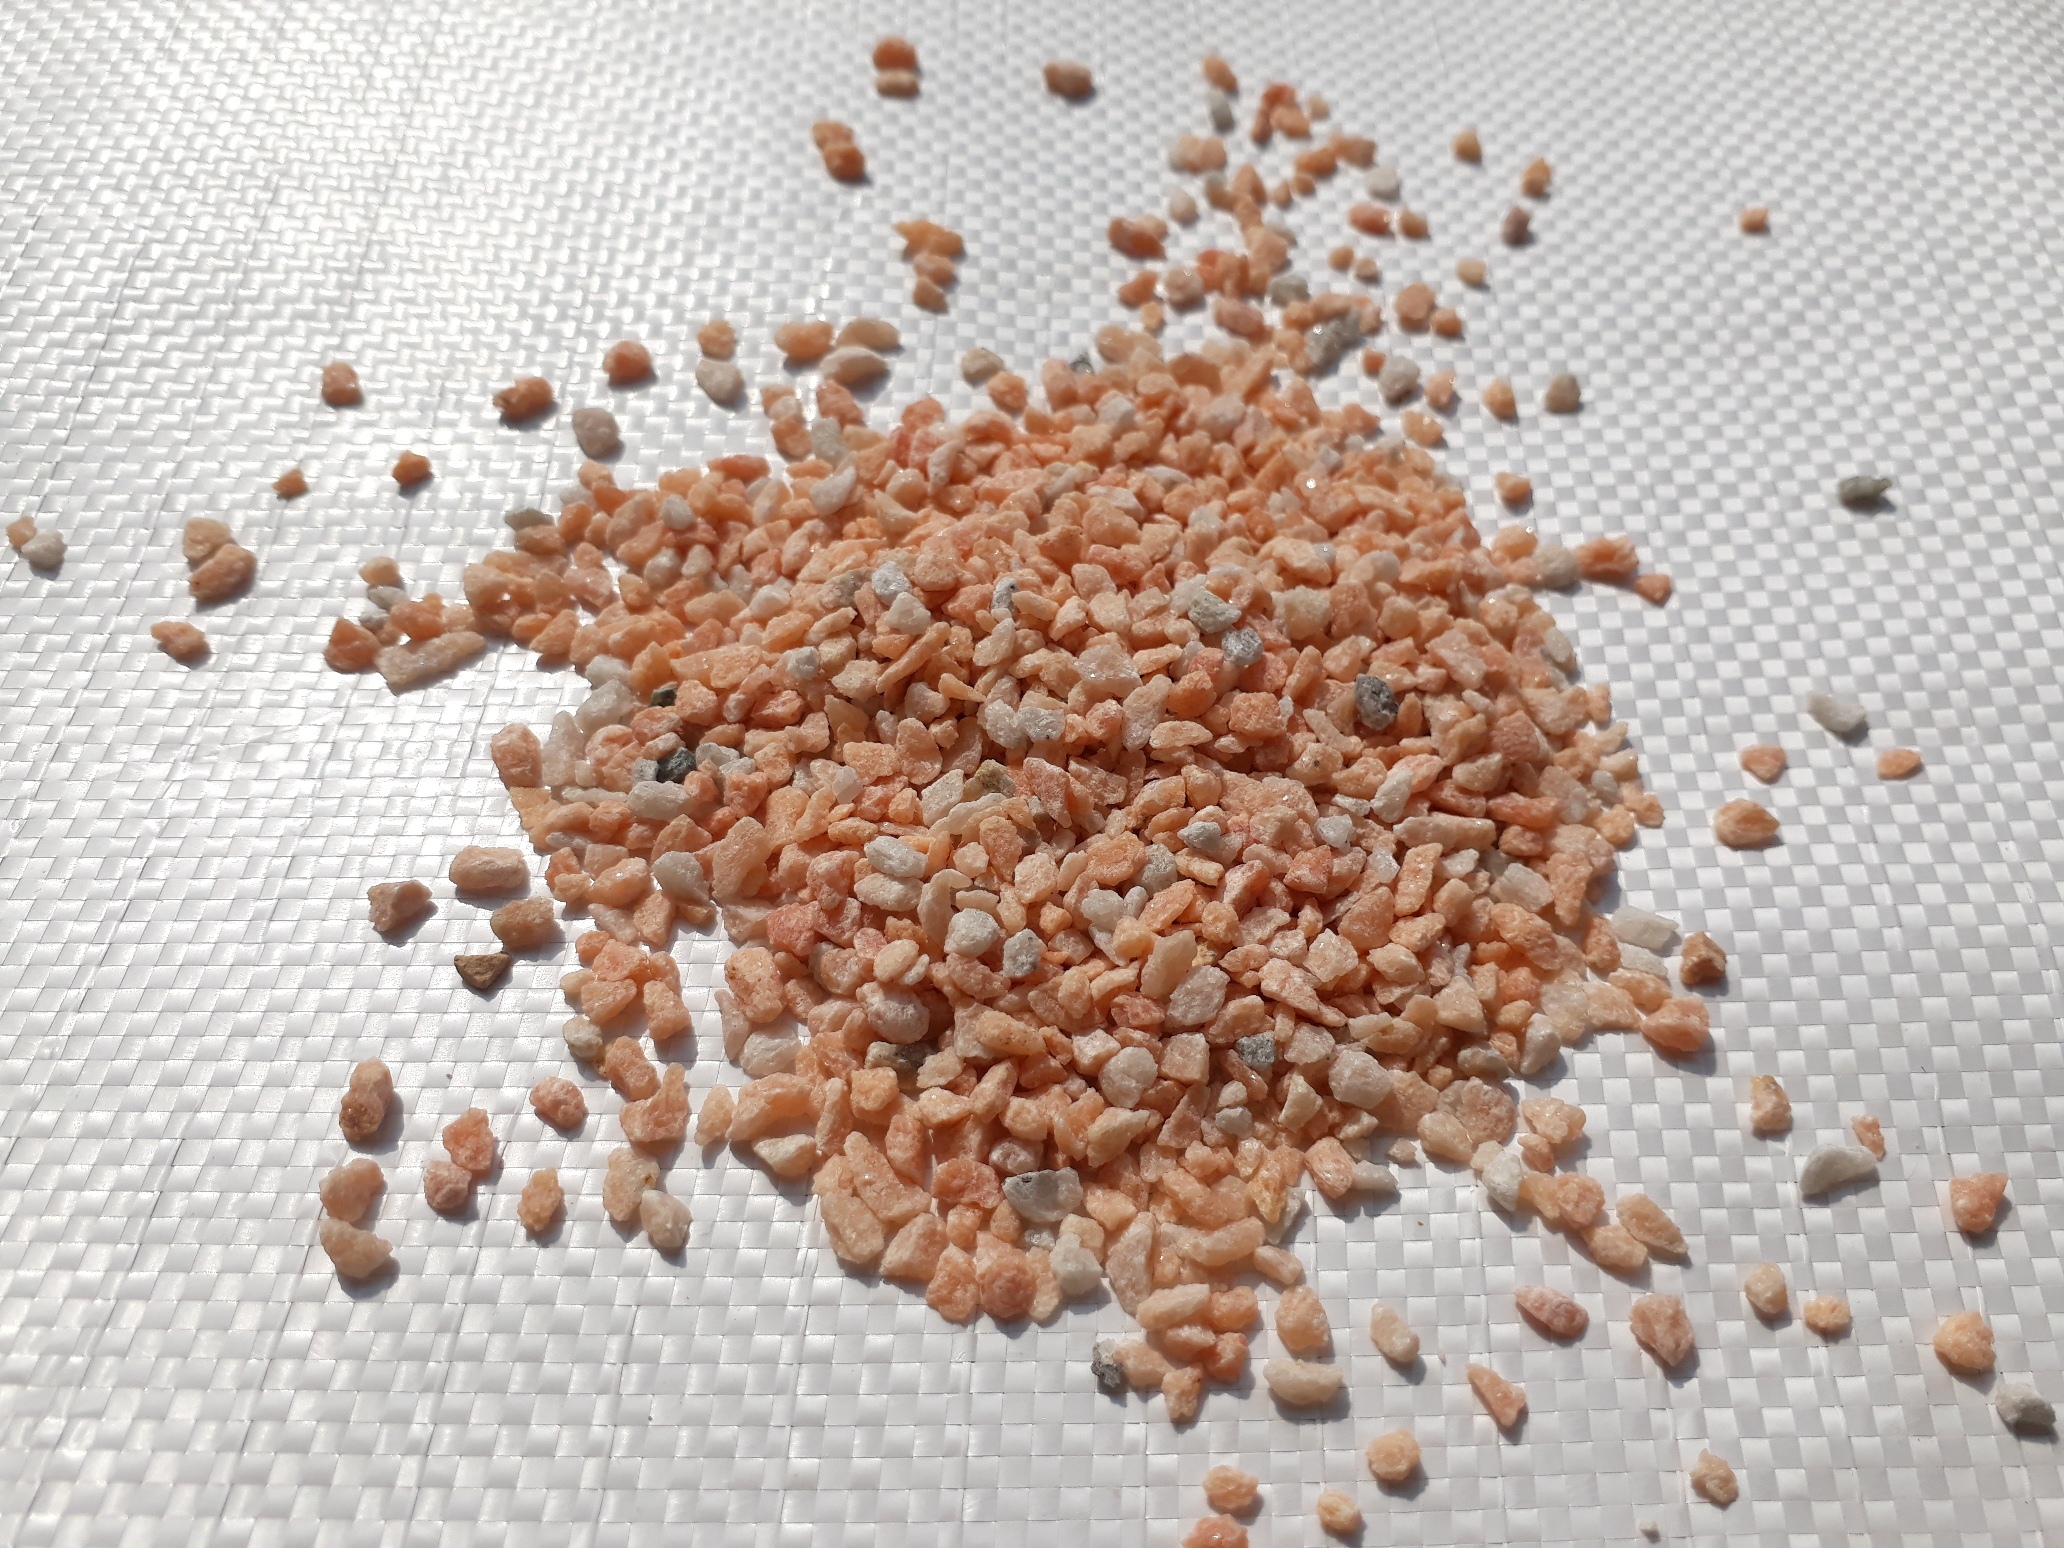 Bulk Manufacturer Of Natural Crushed Rosa Pink Marble Chips And Stone Aggregate